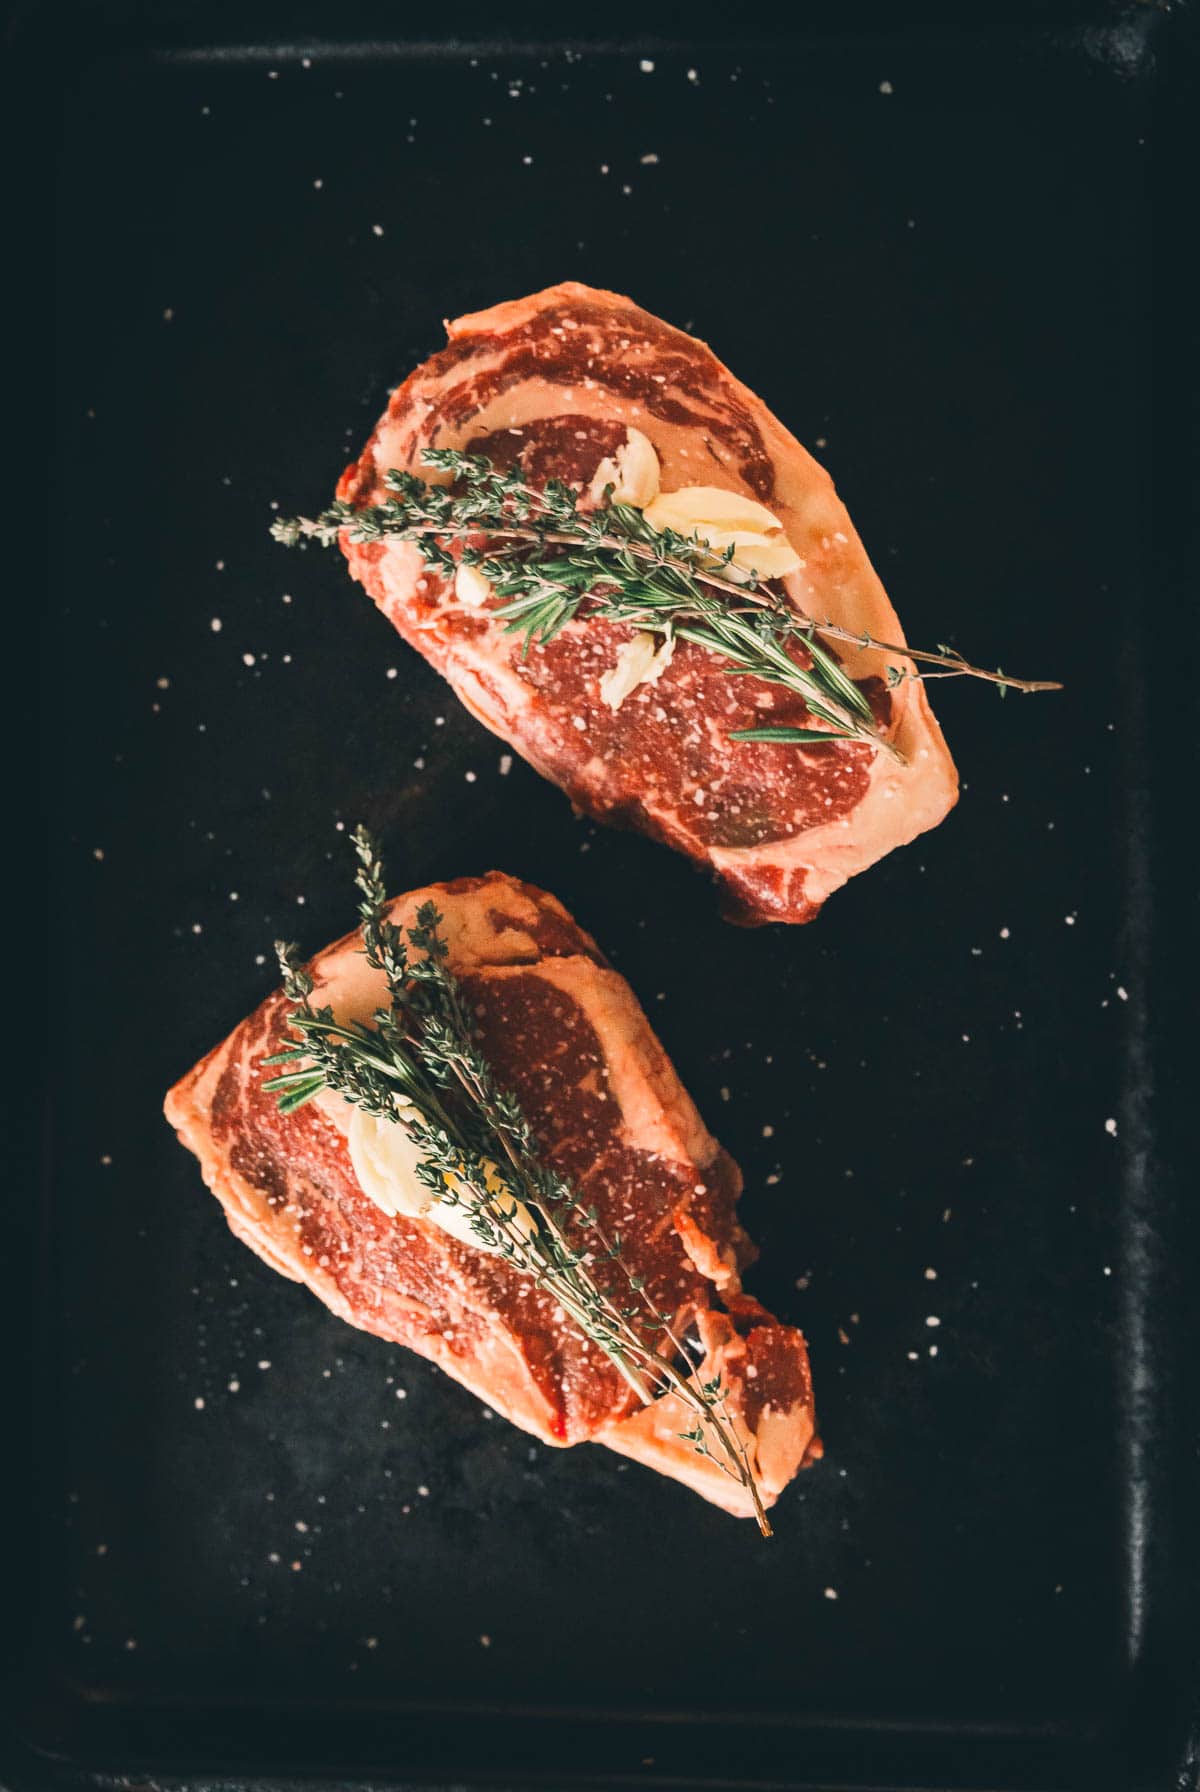 Two raw steaks garnished with garlic and herbs on a dark surface.